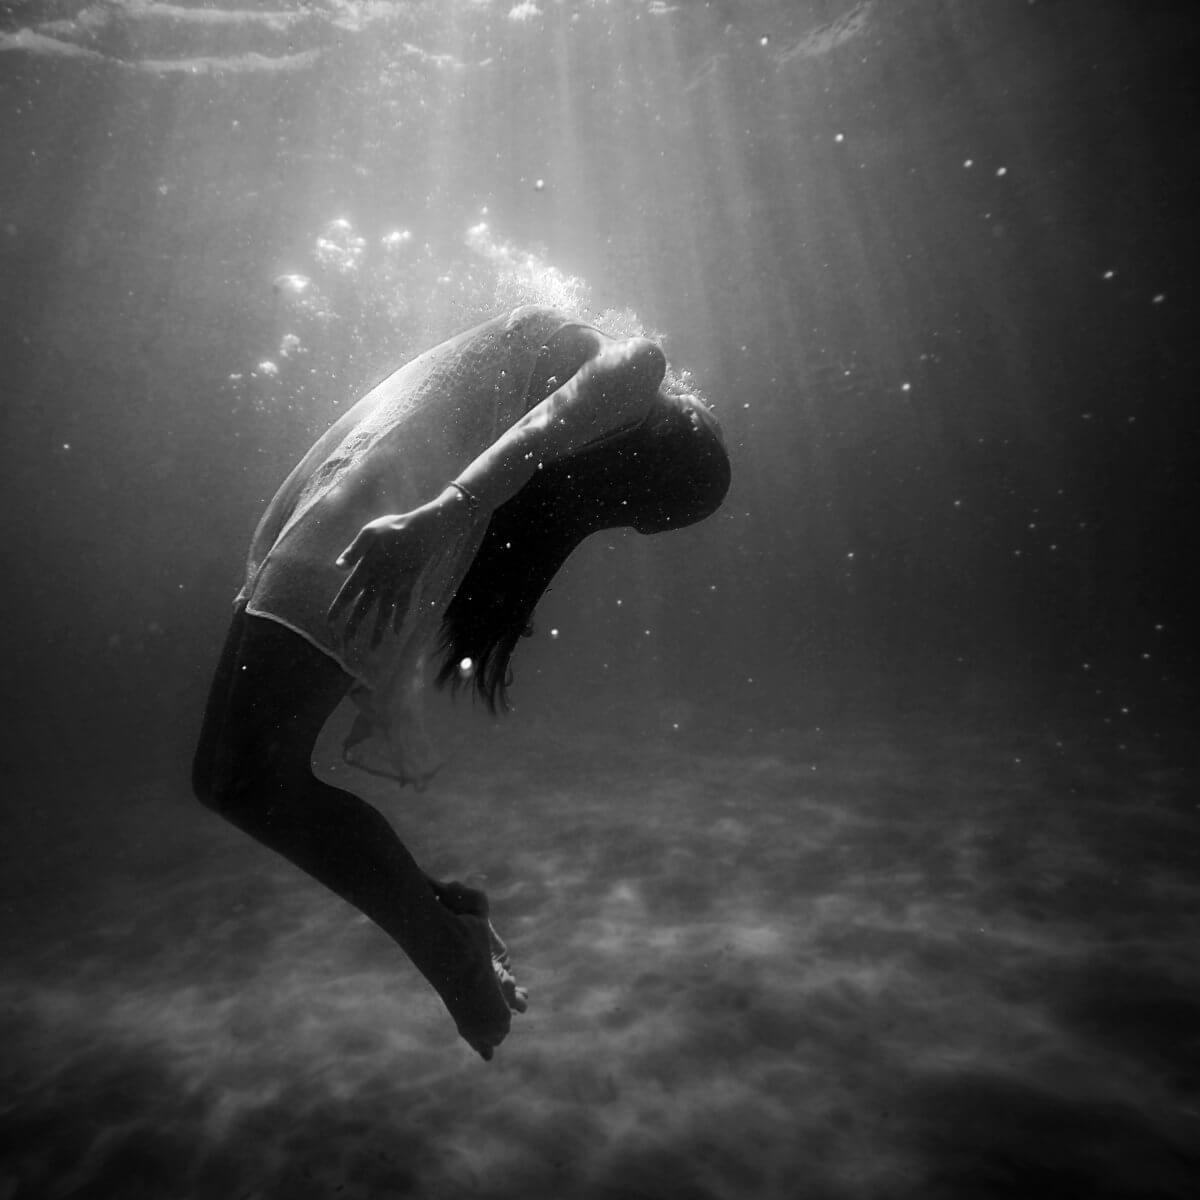 A woman underwater with light shining on her, struggling for air.